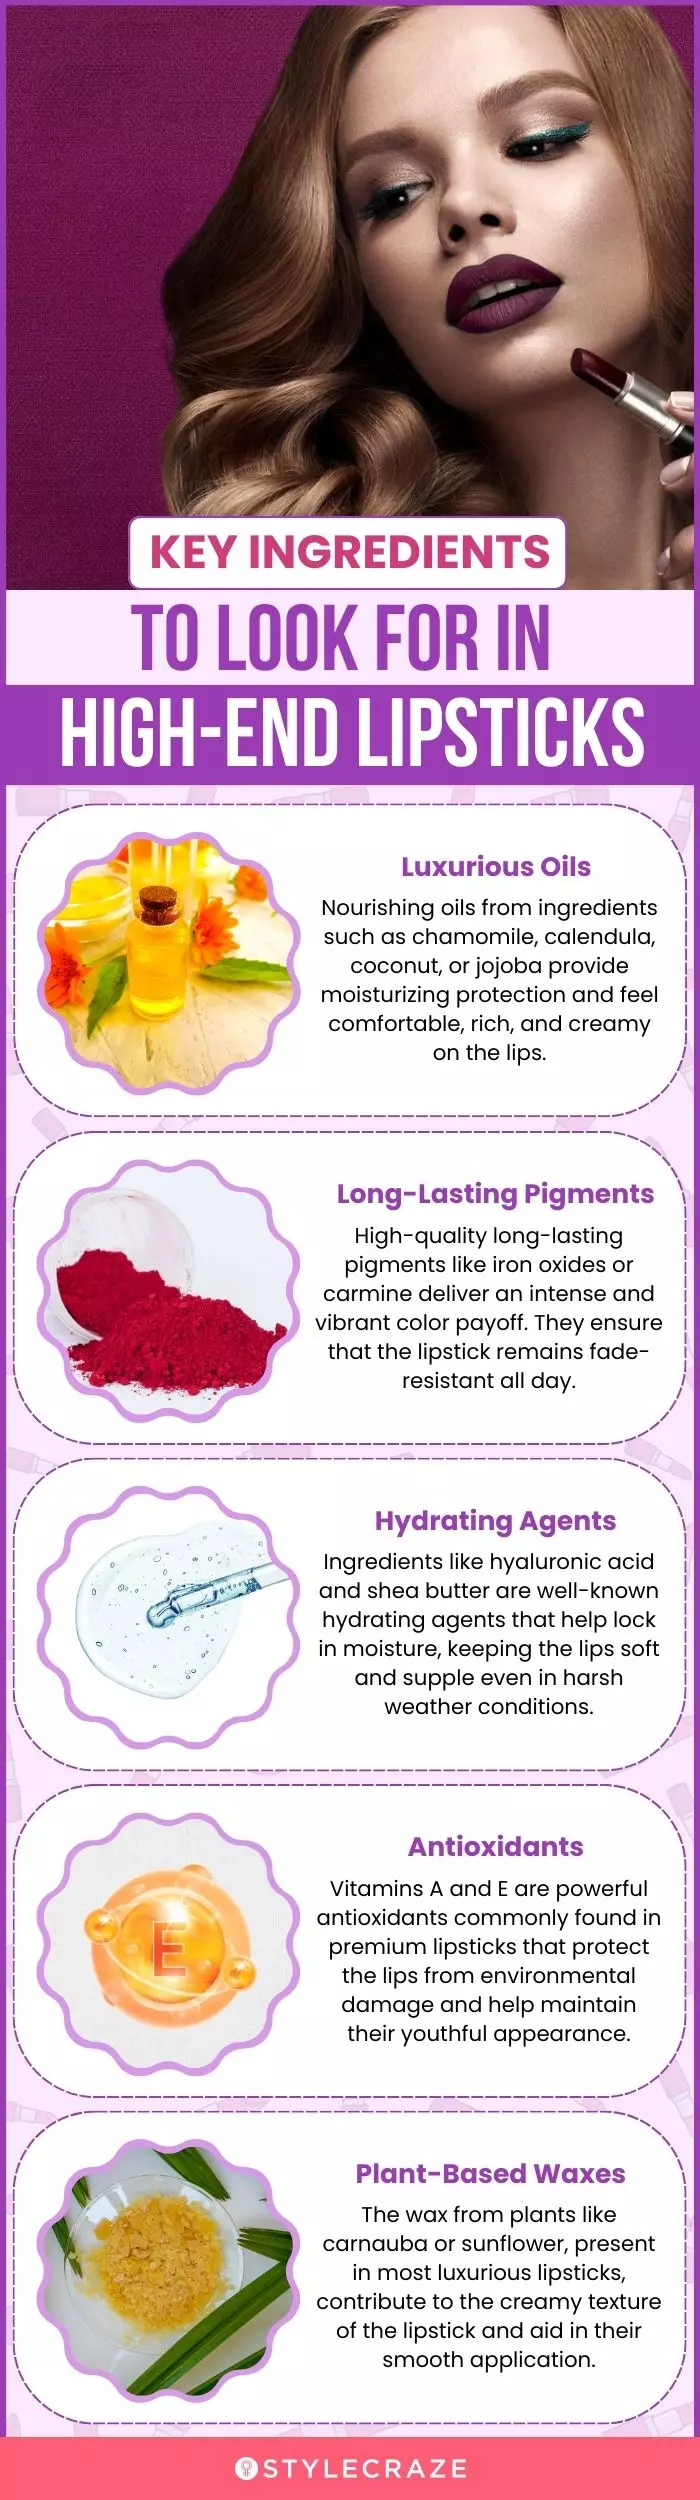 Key Ingredients To Look For In High-End Lipsticks (infographic)